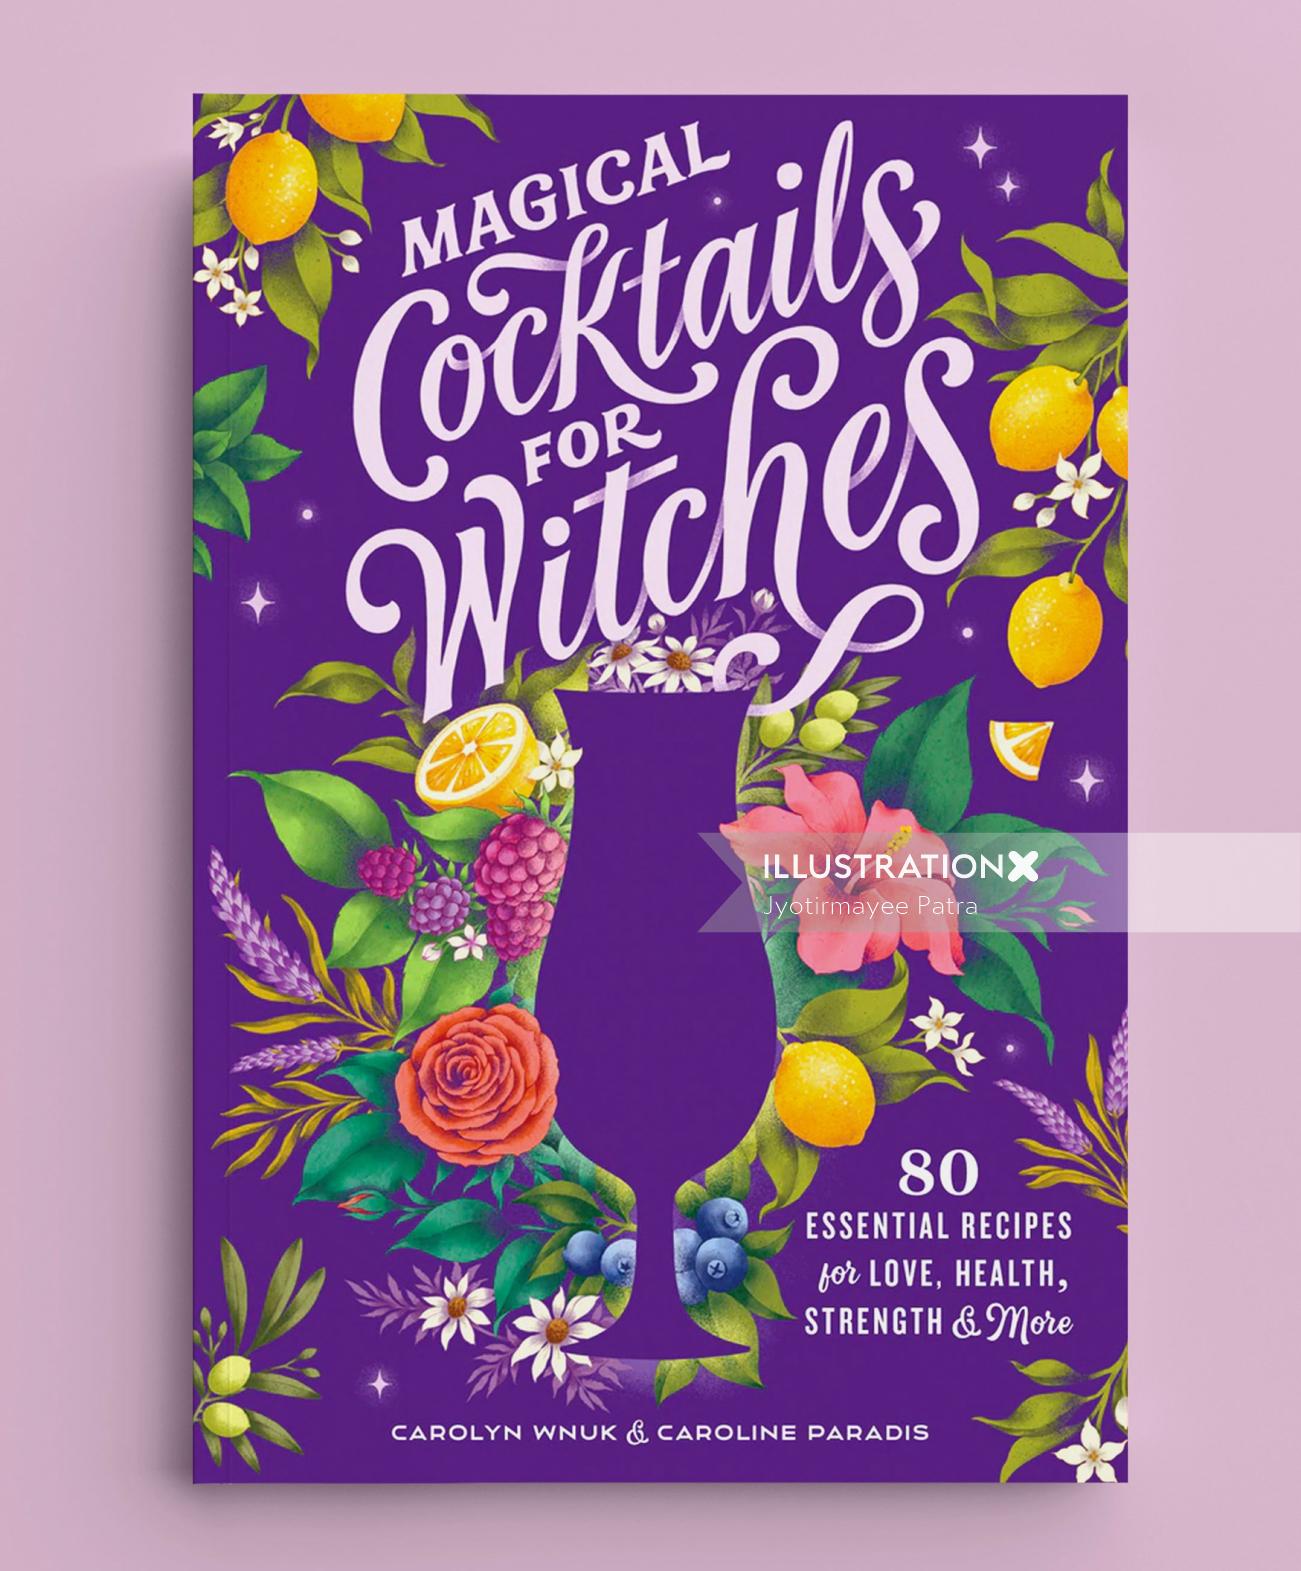 Magical Cocktails for Witches - Cover